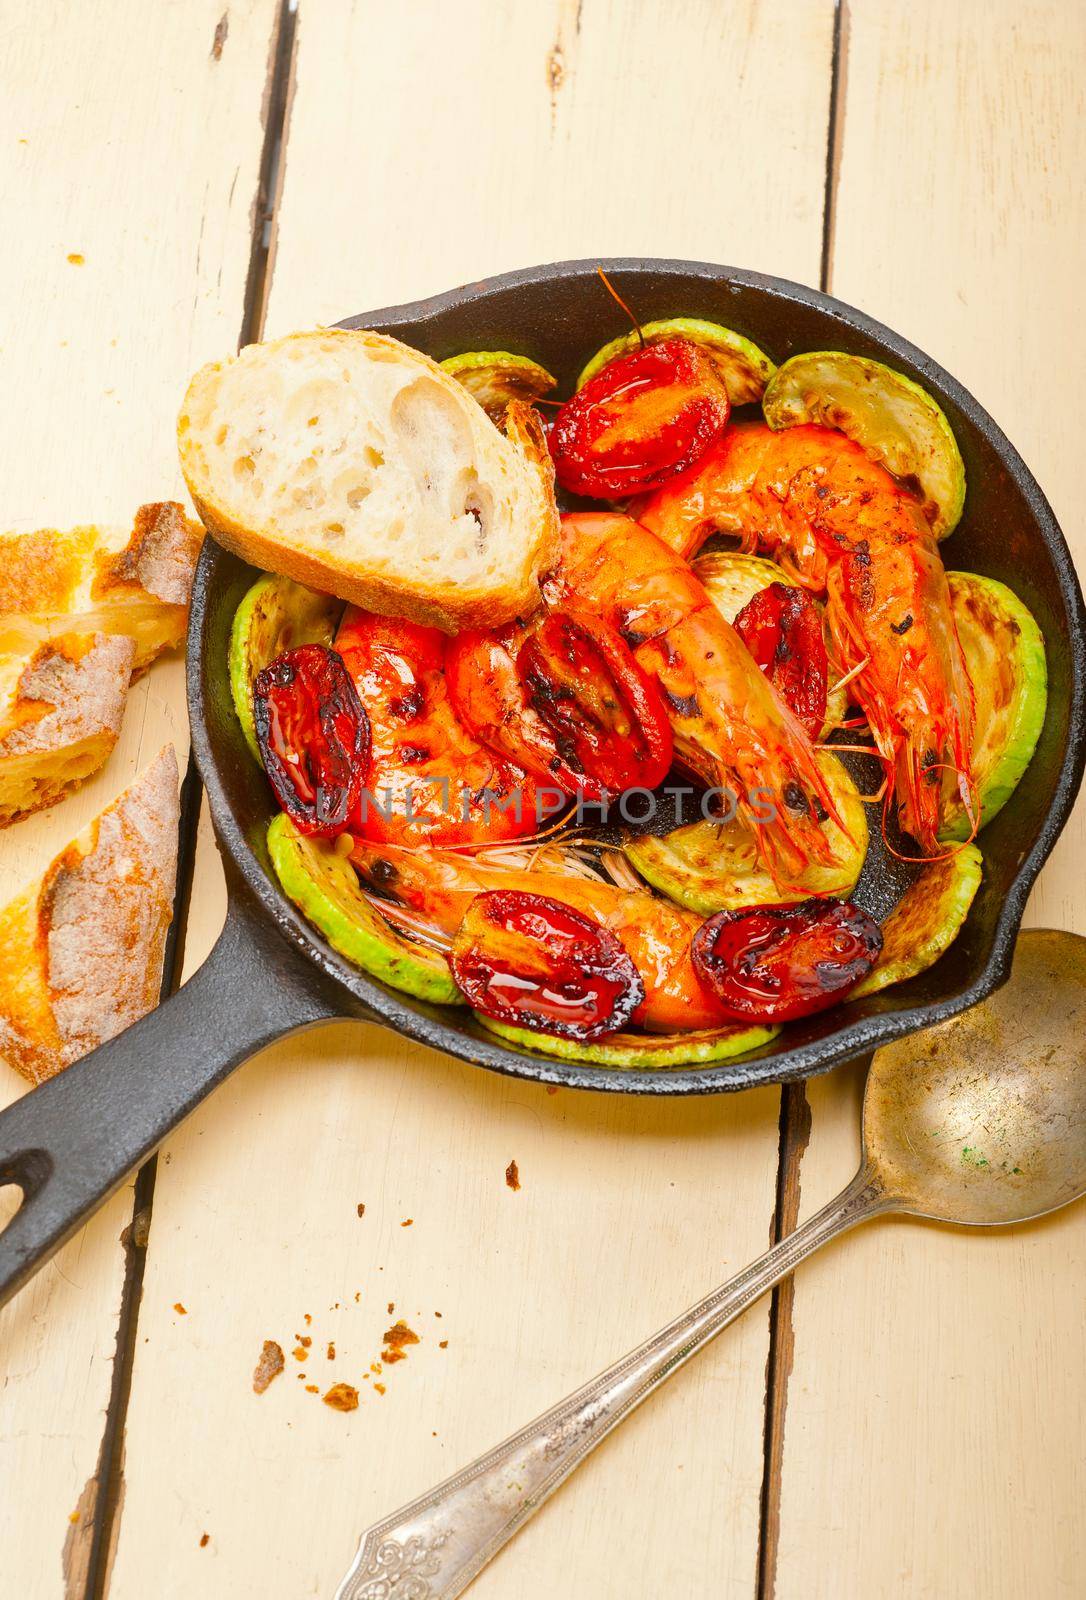 roasted shrimps with zucchini and tomatoes by keko64